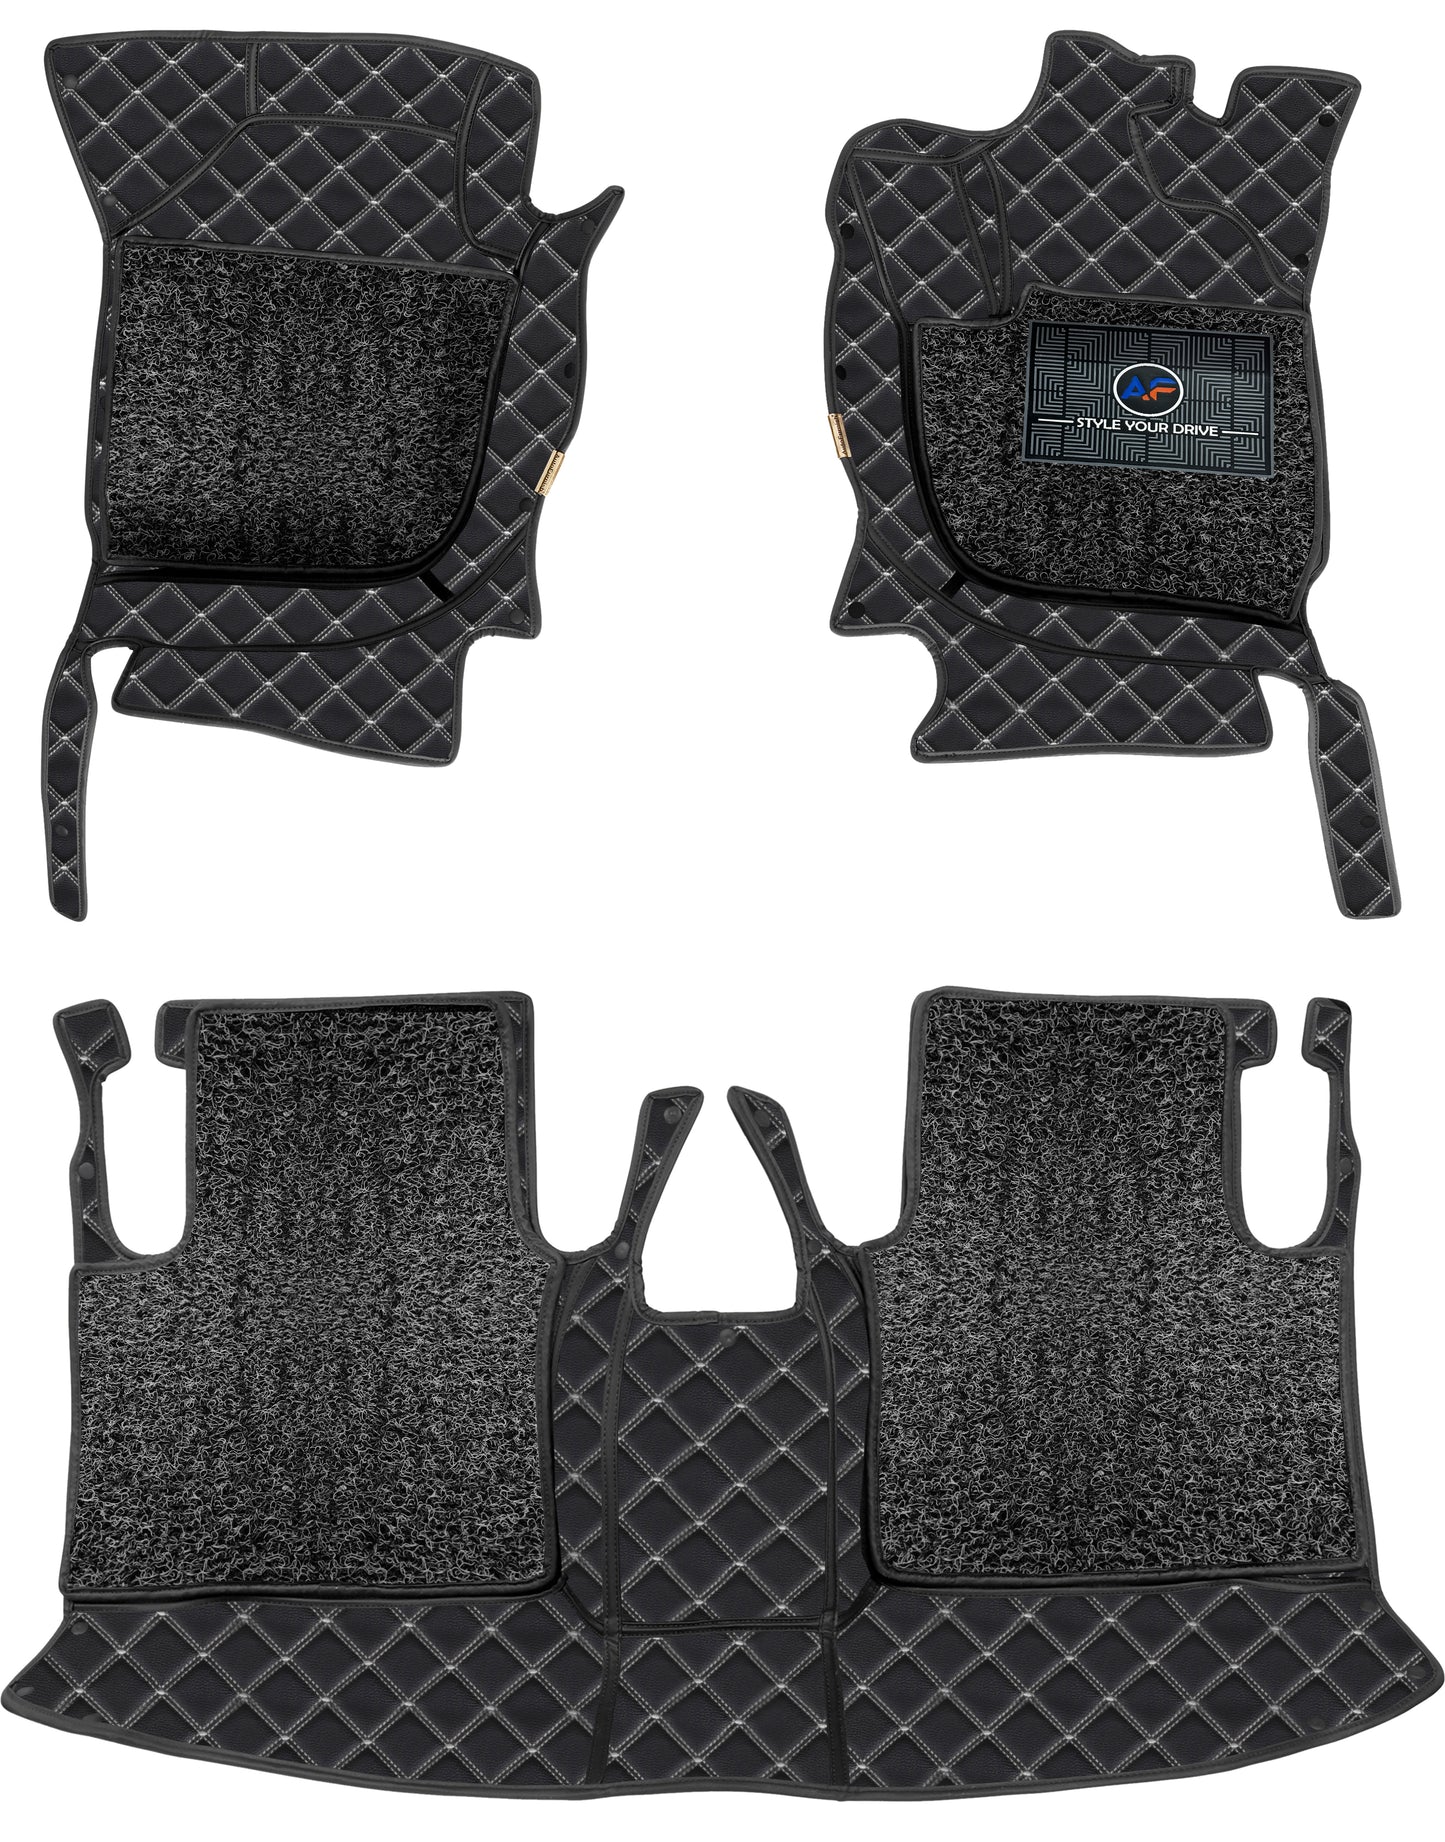 Hyundai Accent 2011 7D Luxury Car Mat, All Weather Proof, Anti-Skid, 100% Waterproof & Odorless with Unique Diamond Fish Design (24mm Luxury PU Leather, 2 Rows)